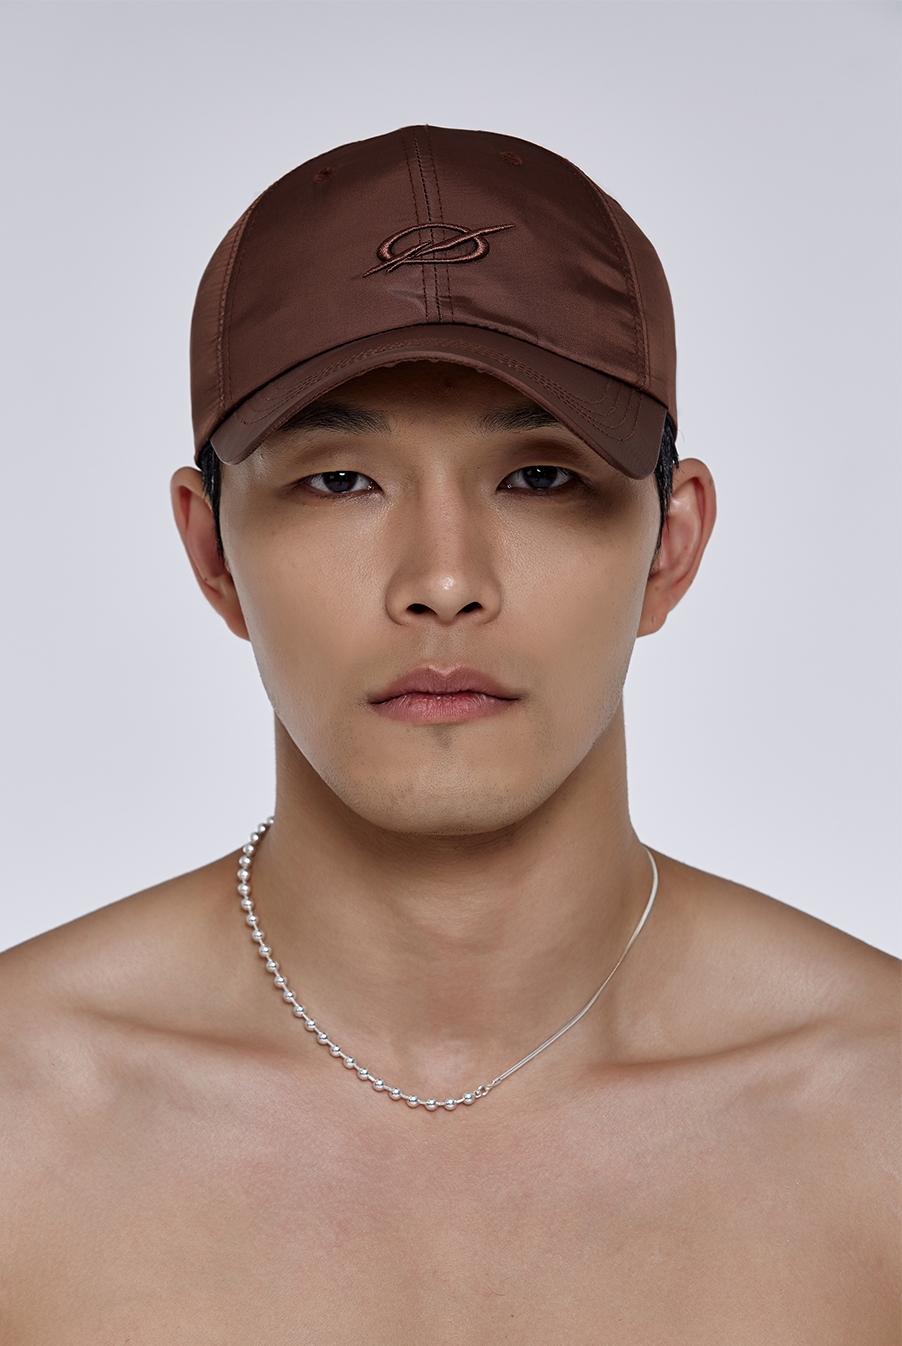 SHINY LOGO EMBROIDERY CAP - BROWN